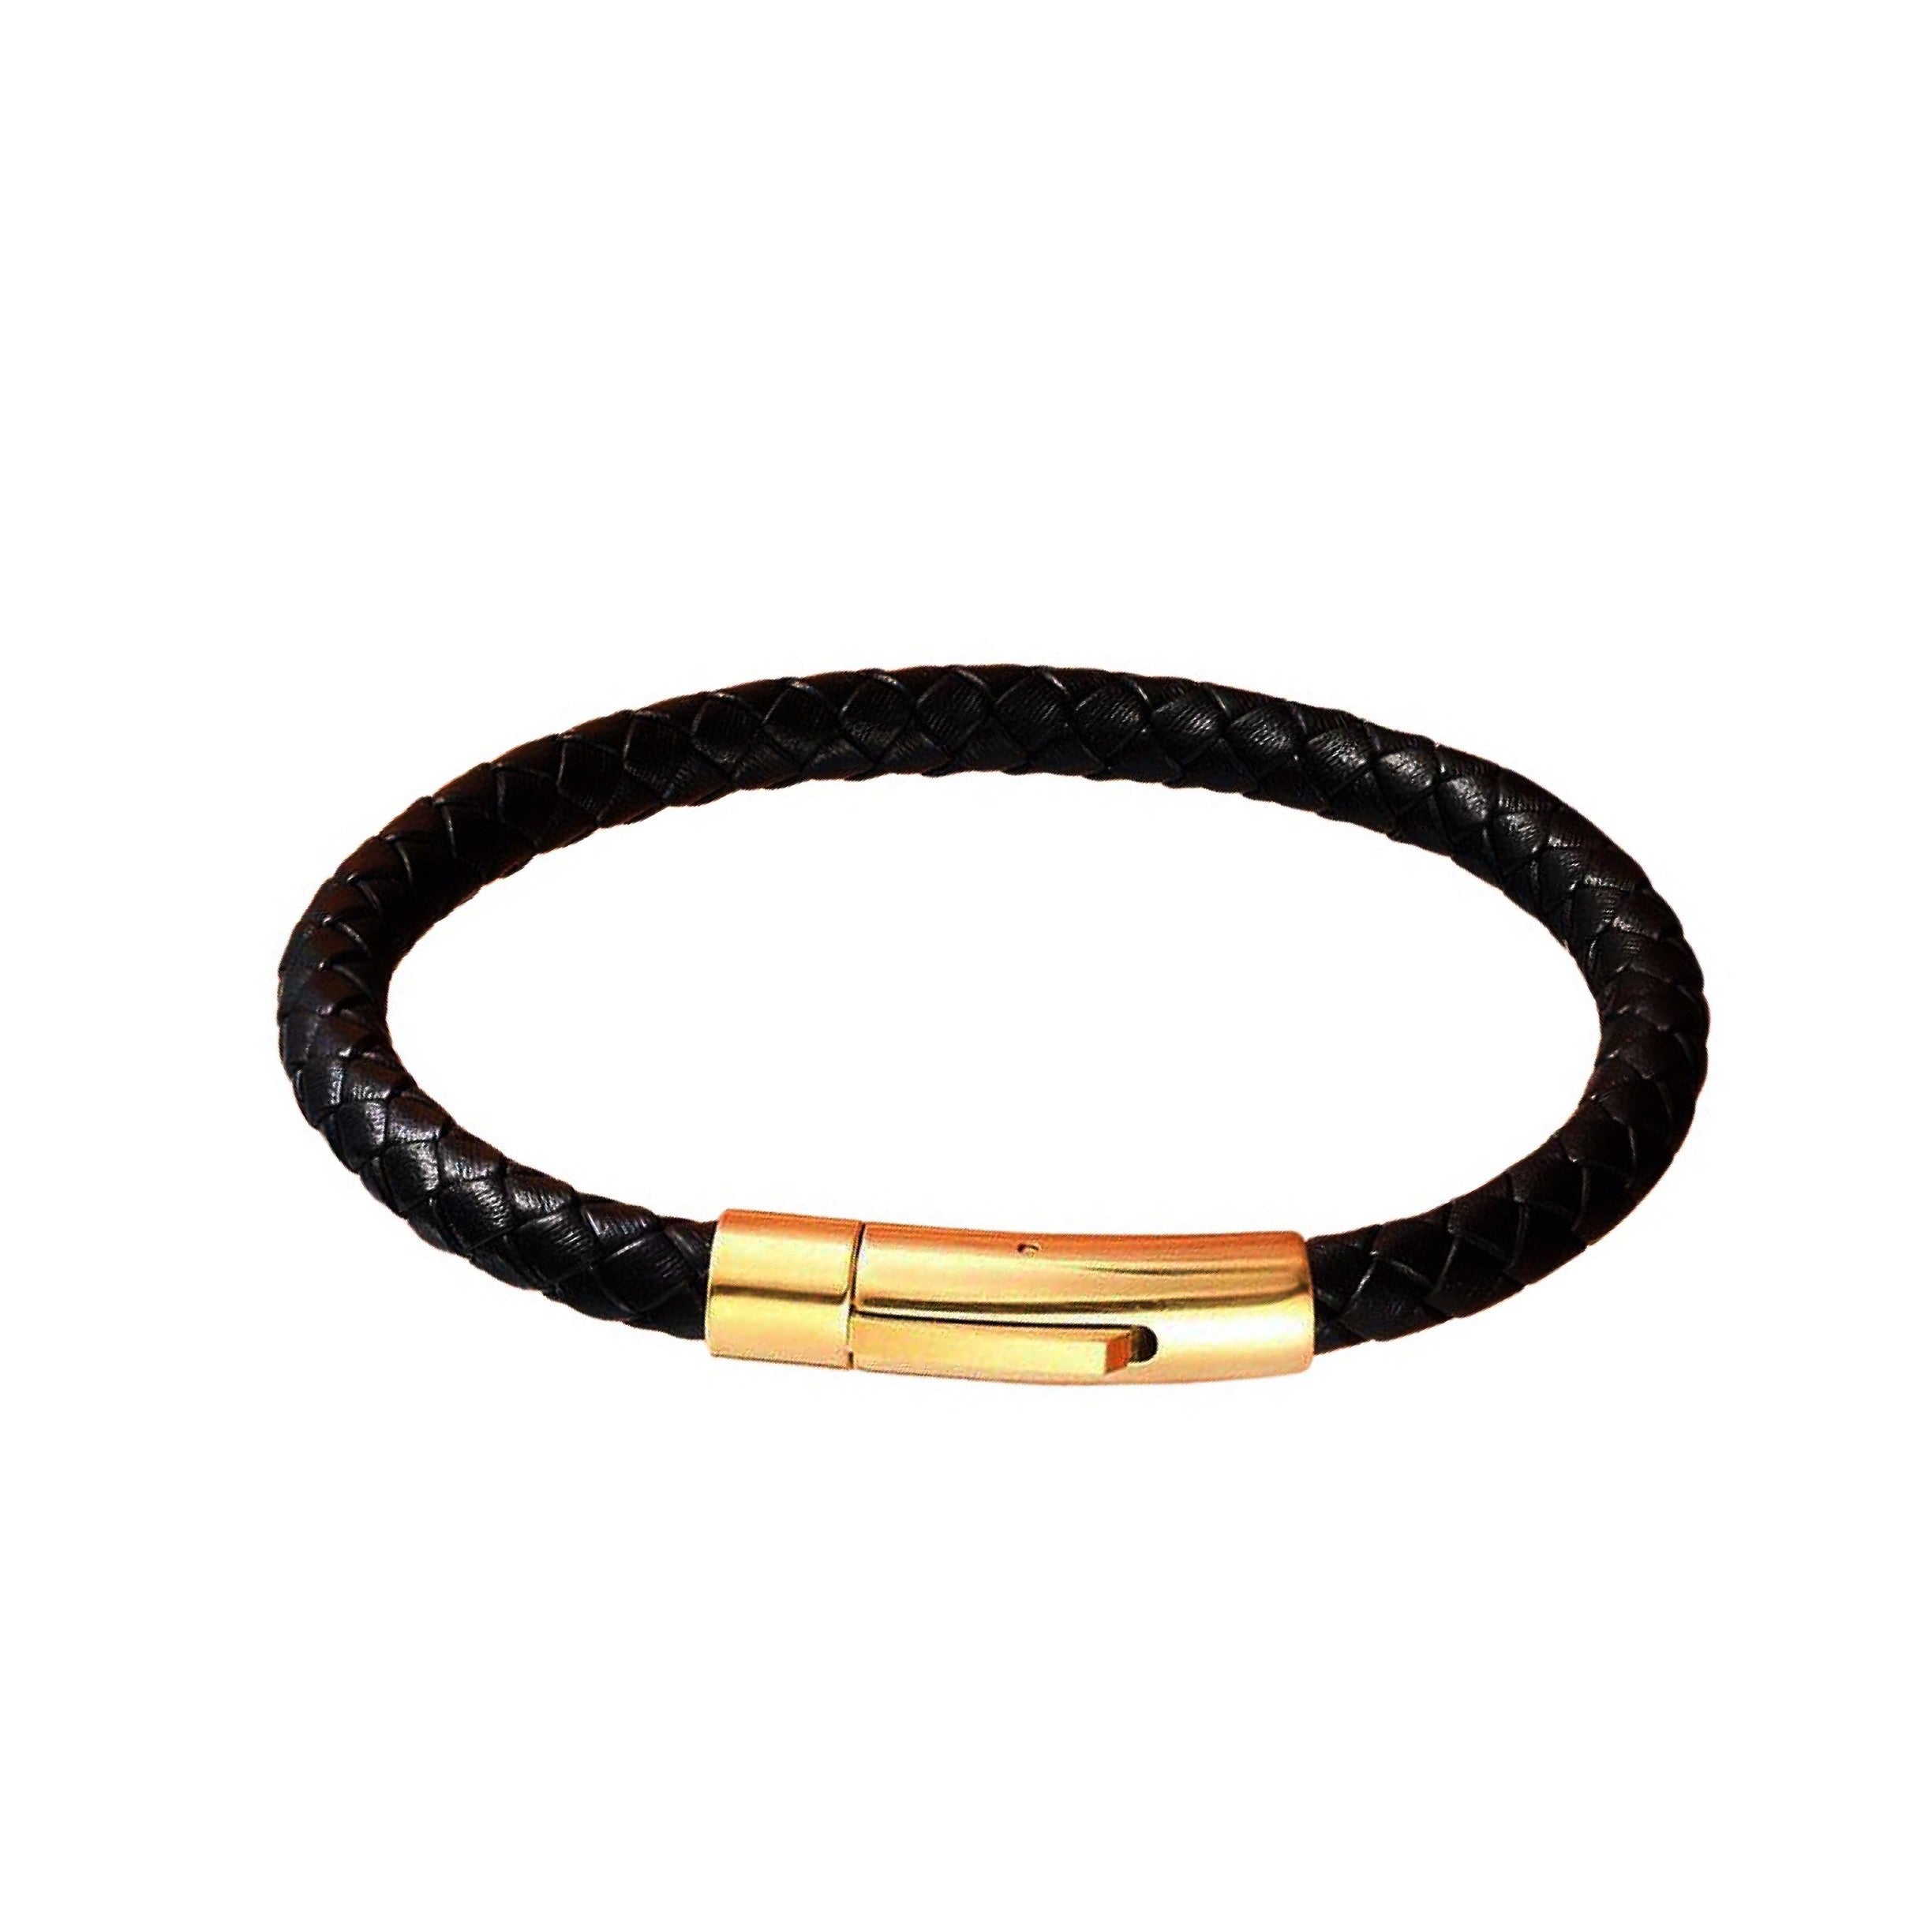 Gold Leather Bracelet for Men at Candere by Kalyan Jewellers.